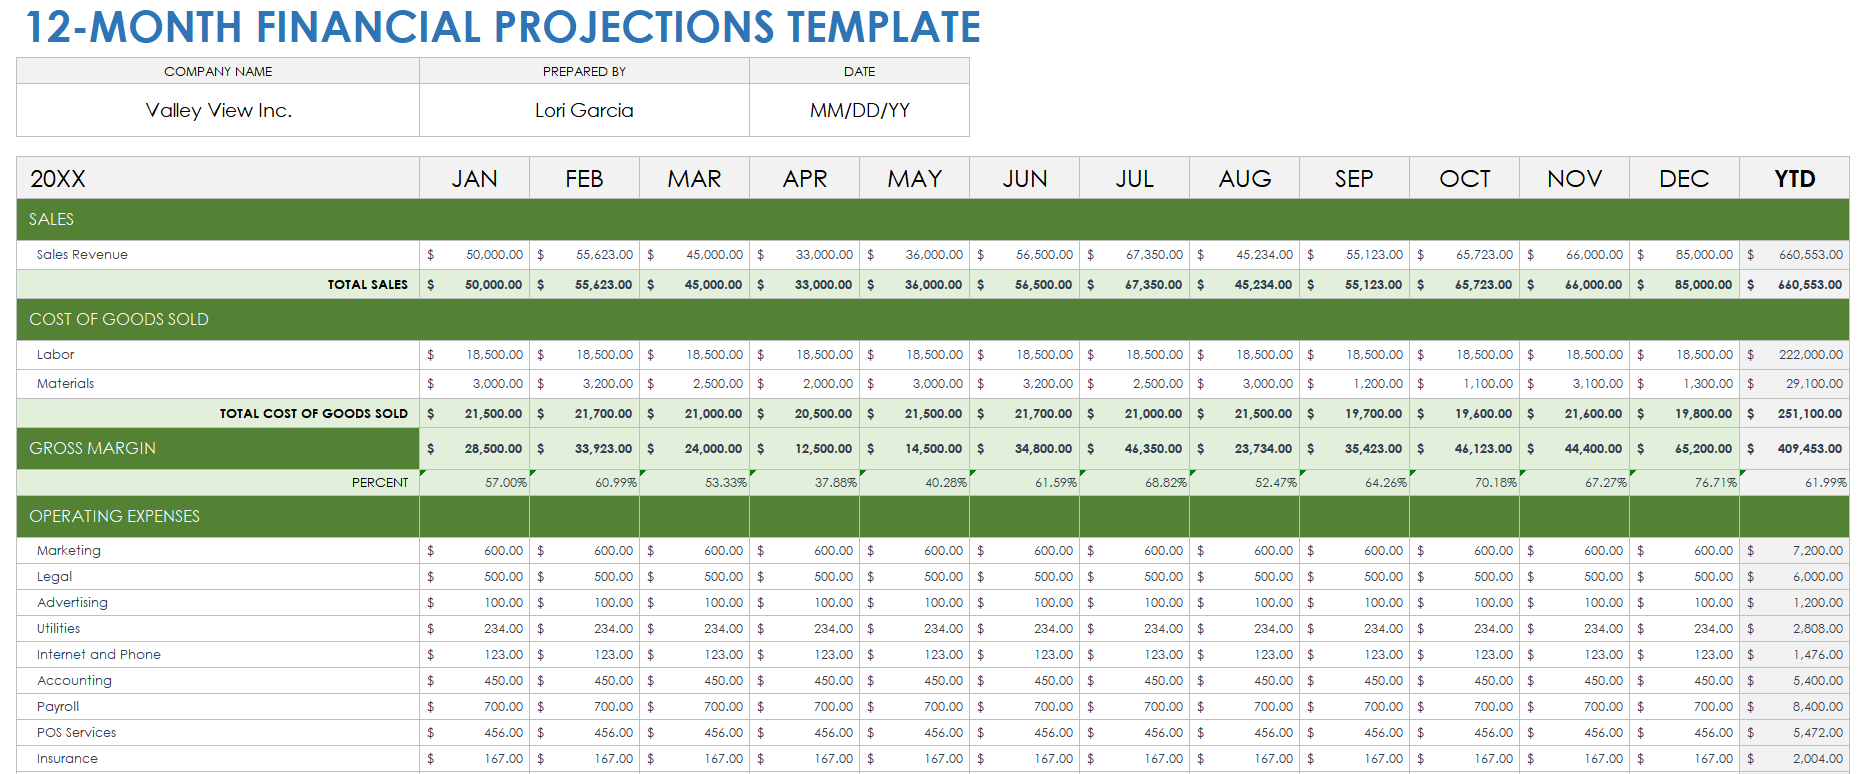 12-Month Financial Projection Example Template